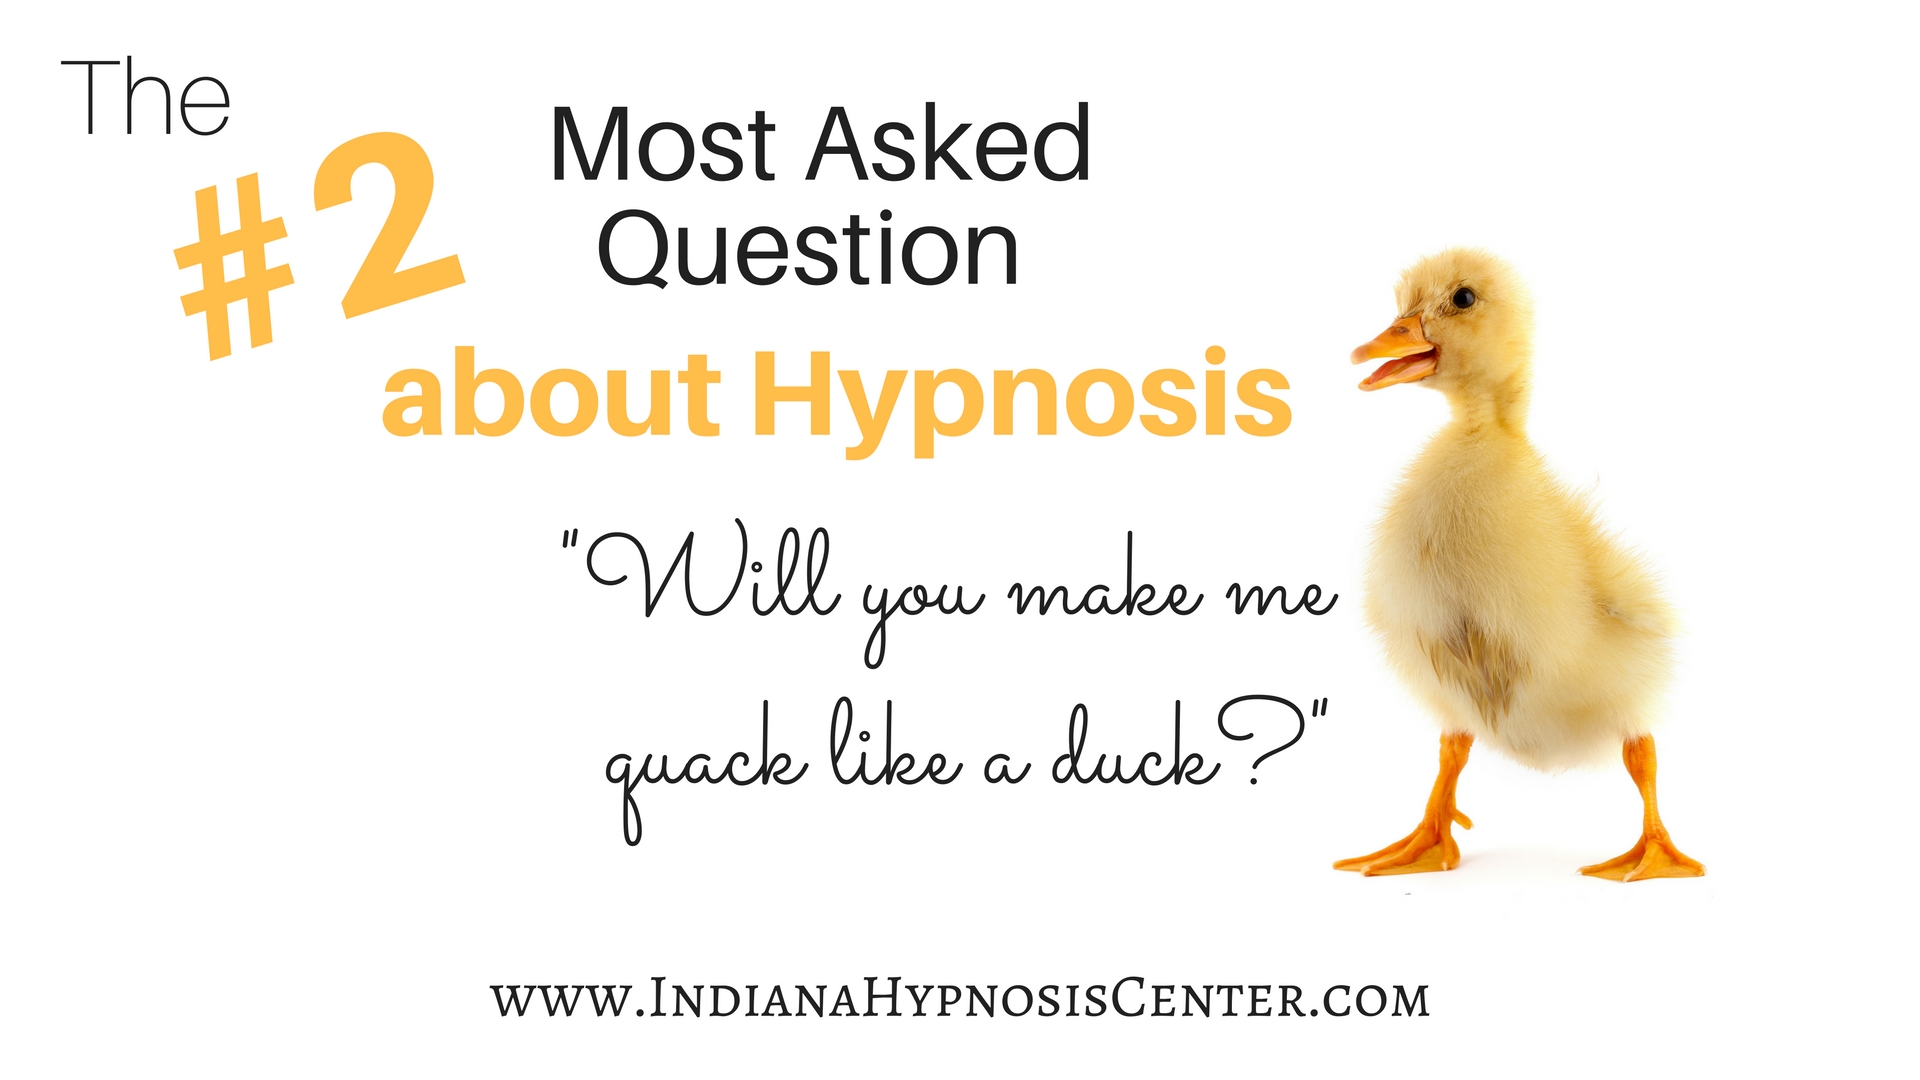 #2 Most Asked Question about Hypnosis